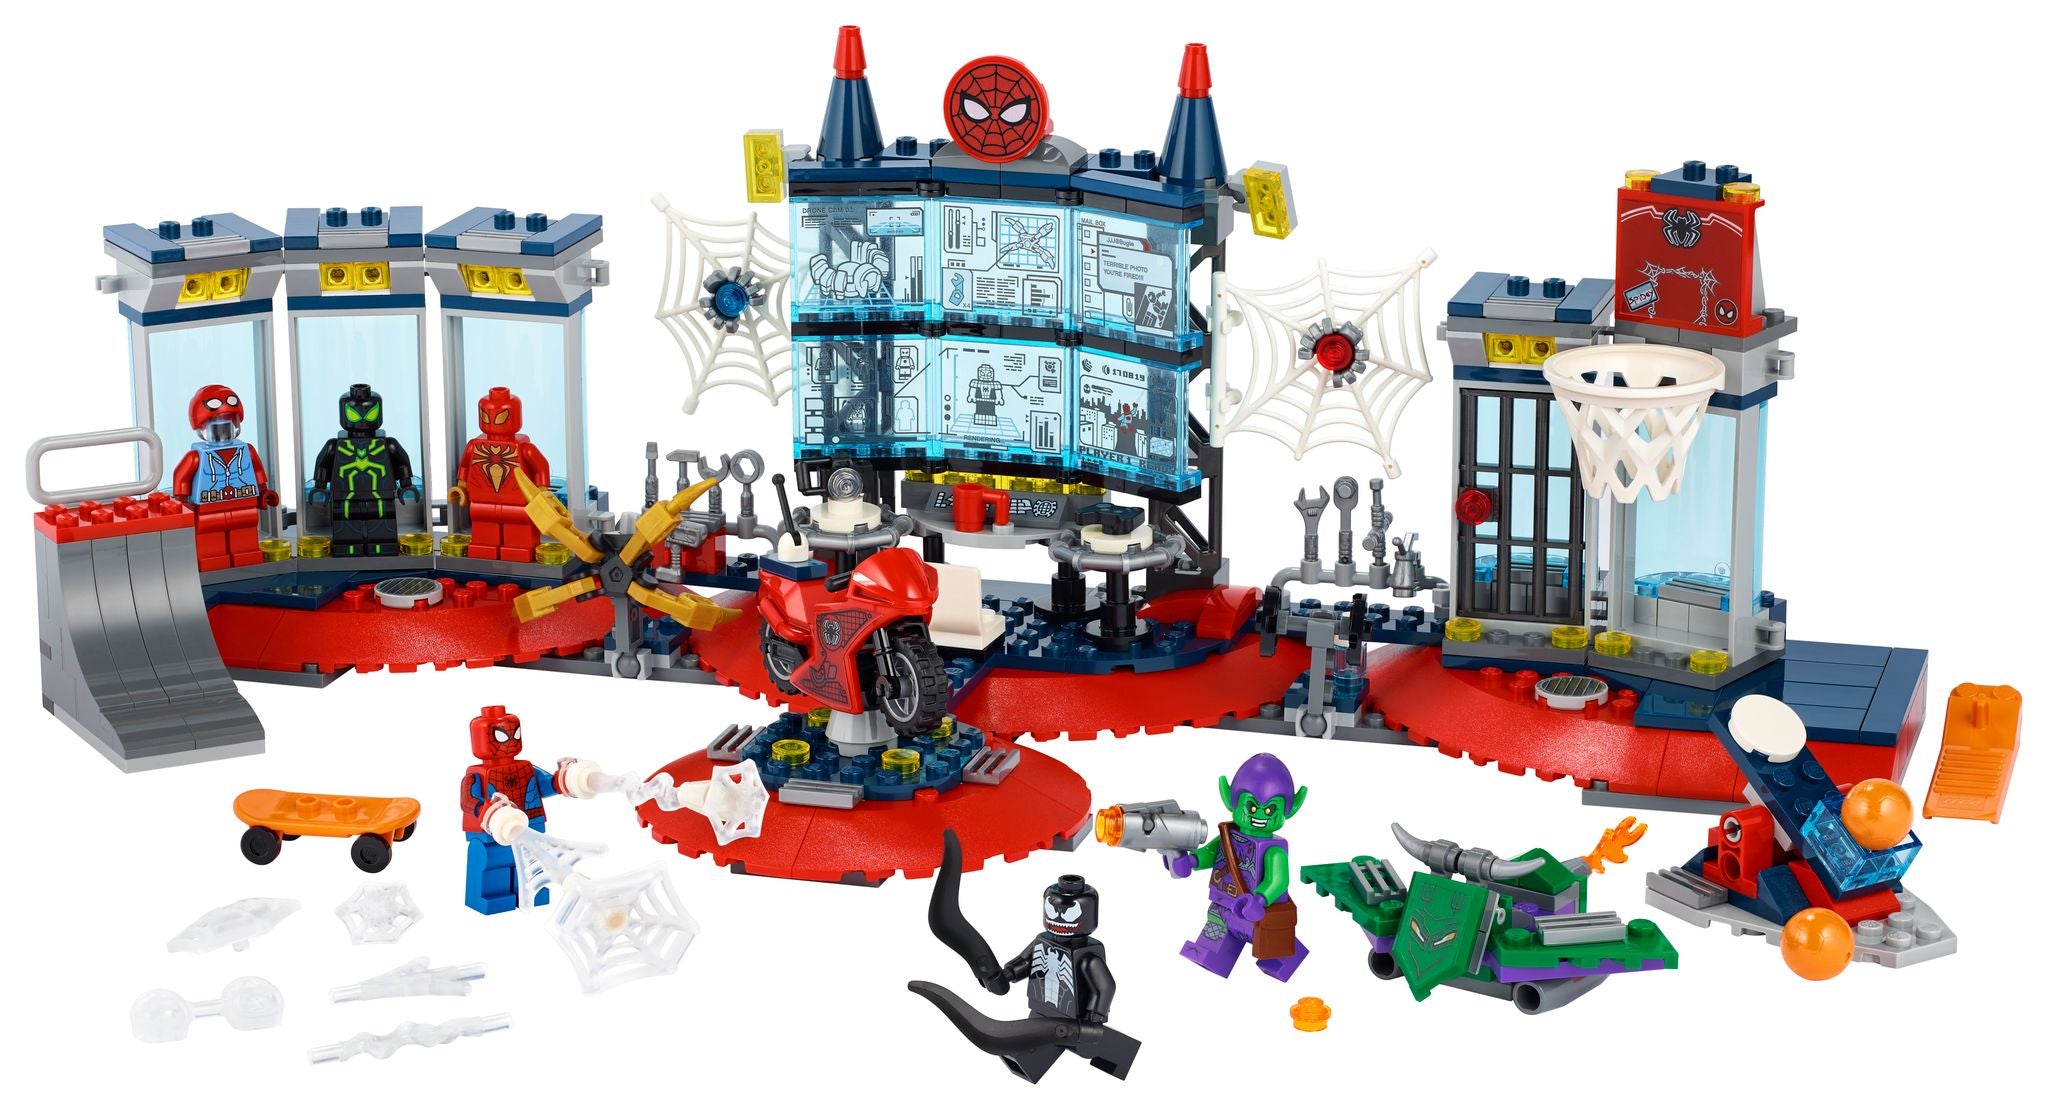 LEGO: Super Heroes - Attack on the Spider Lair